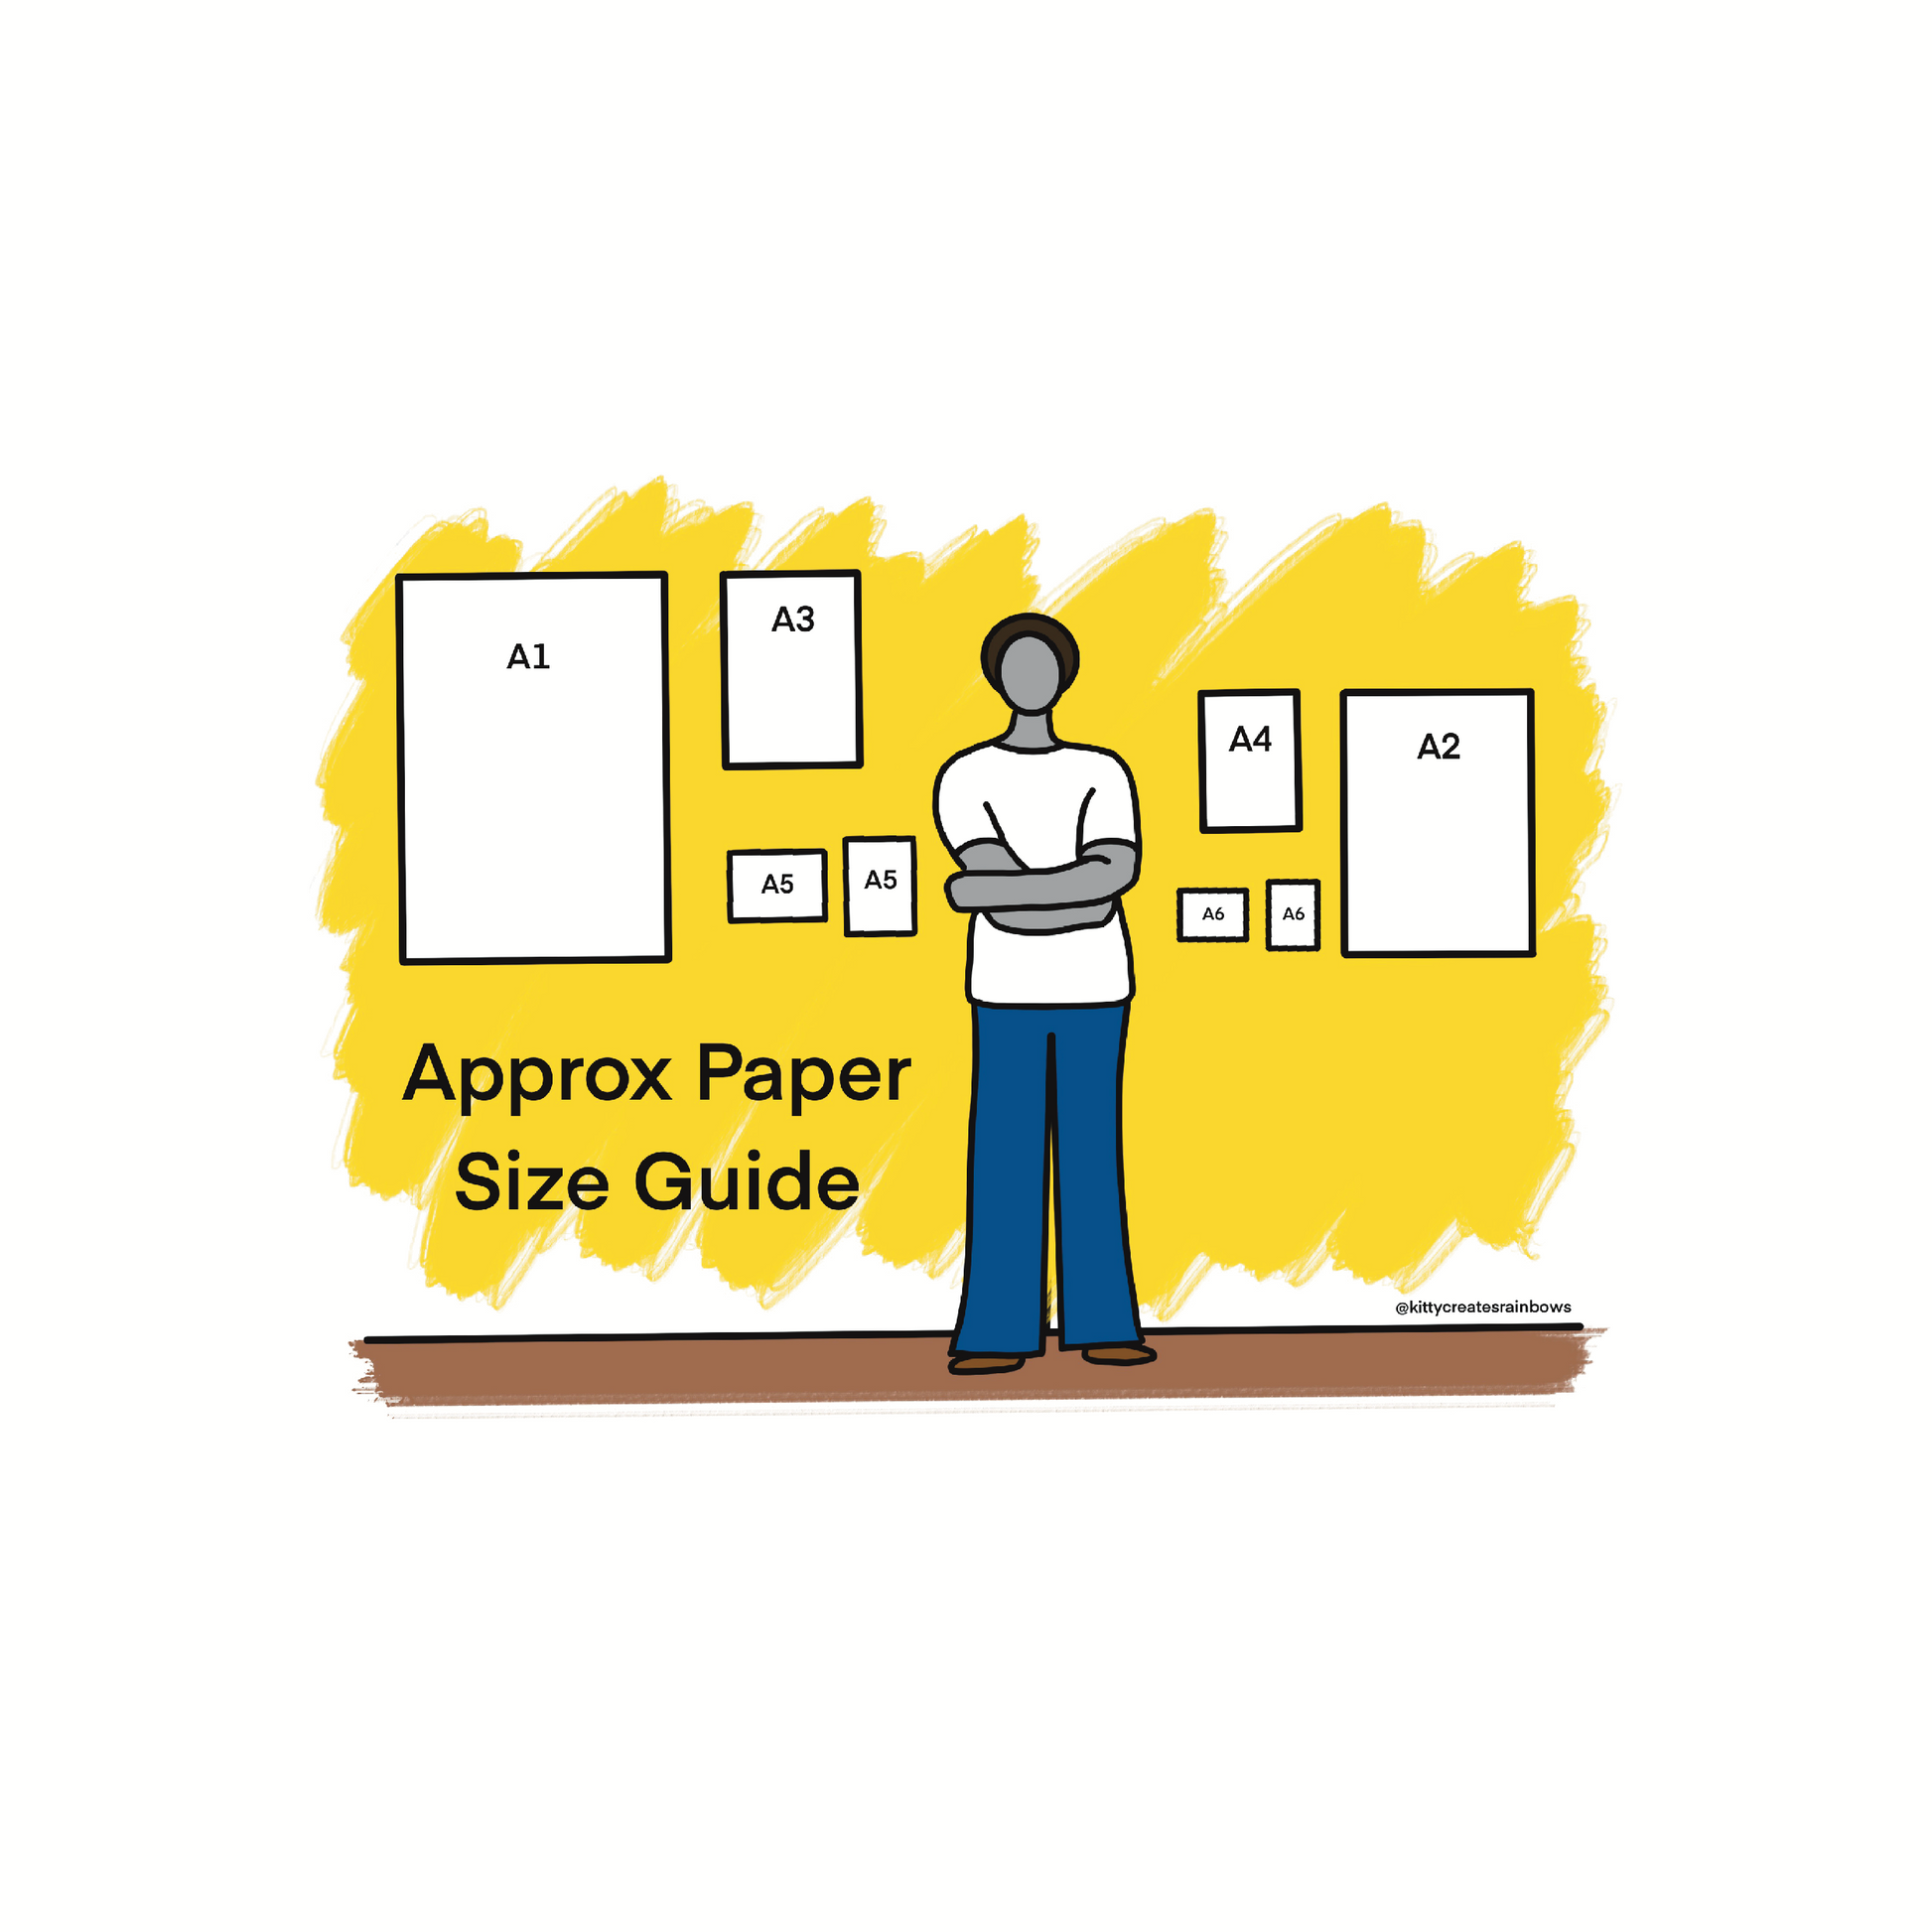 Page size dimensions image featuring white framed illustrations of paper sizes, with an illustrated figure stood in front for visual reference.